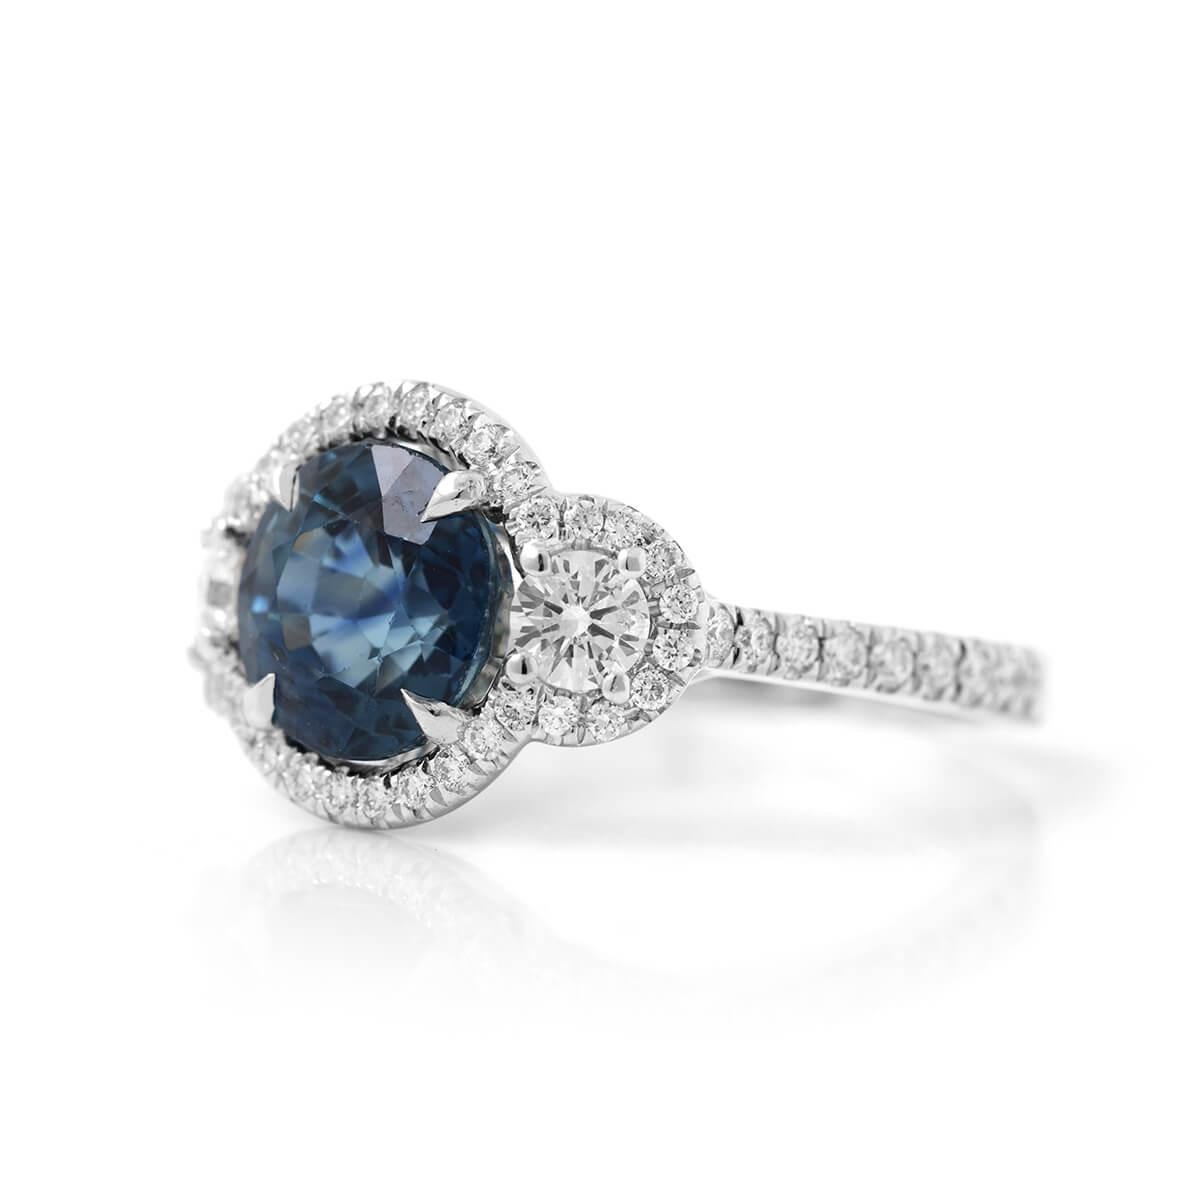 WHITE GOLD OVAL BLUE SAPPHIRE RING WITH WHITE DIAMONDS - 3.88 CT


Set in 18K White gold


Total sapphire weight: 3.33 ct
[ 1 stone ]
Color: Blue

Total white diamond weight: 0.55 ct
[ 56 diamonds ]
Color: G-H
Clarity: VS

Total ring weight: 5.46